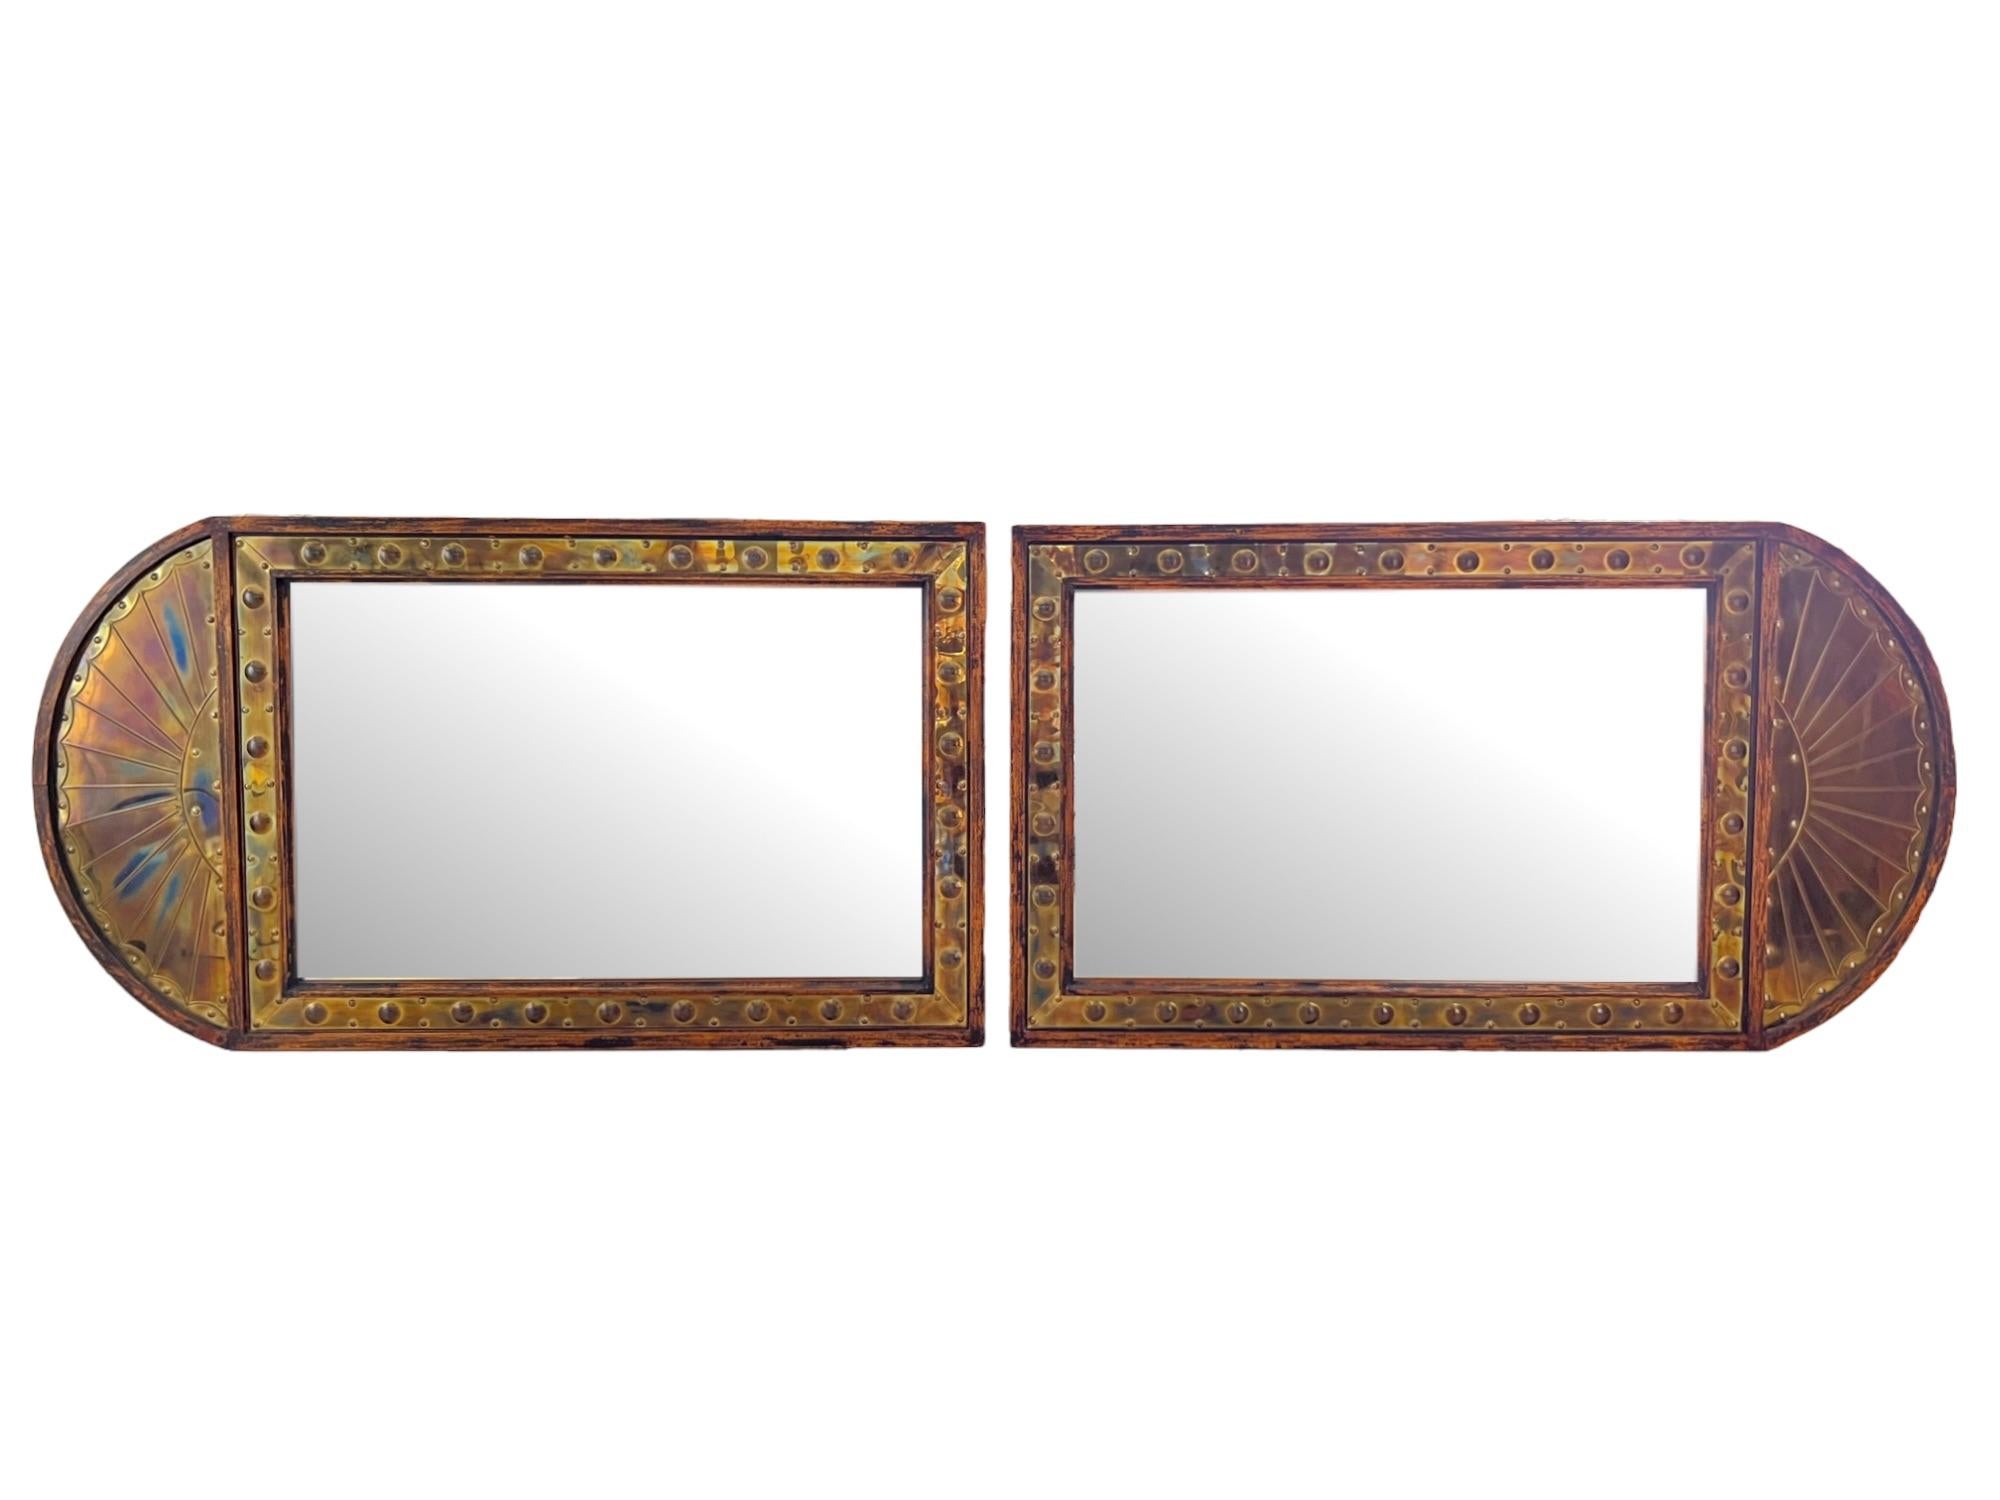 Hollywood Regency Vintage Italian Sarreid Studded Brass Repoussé Arched Wall Mirrors, Pair